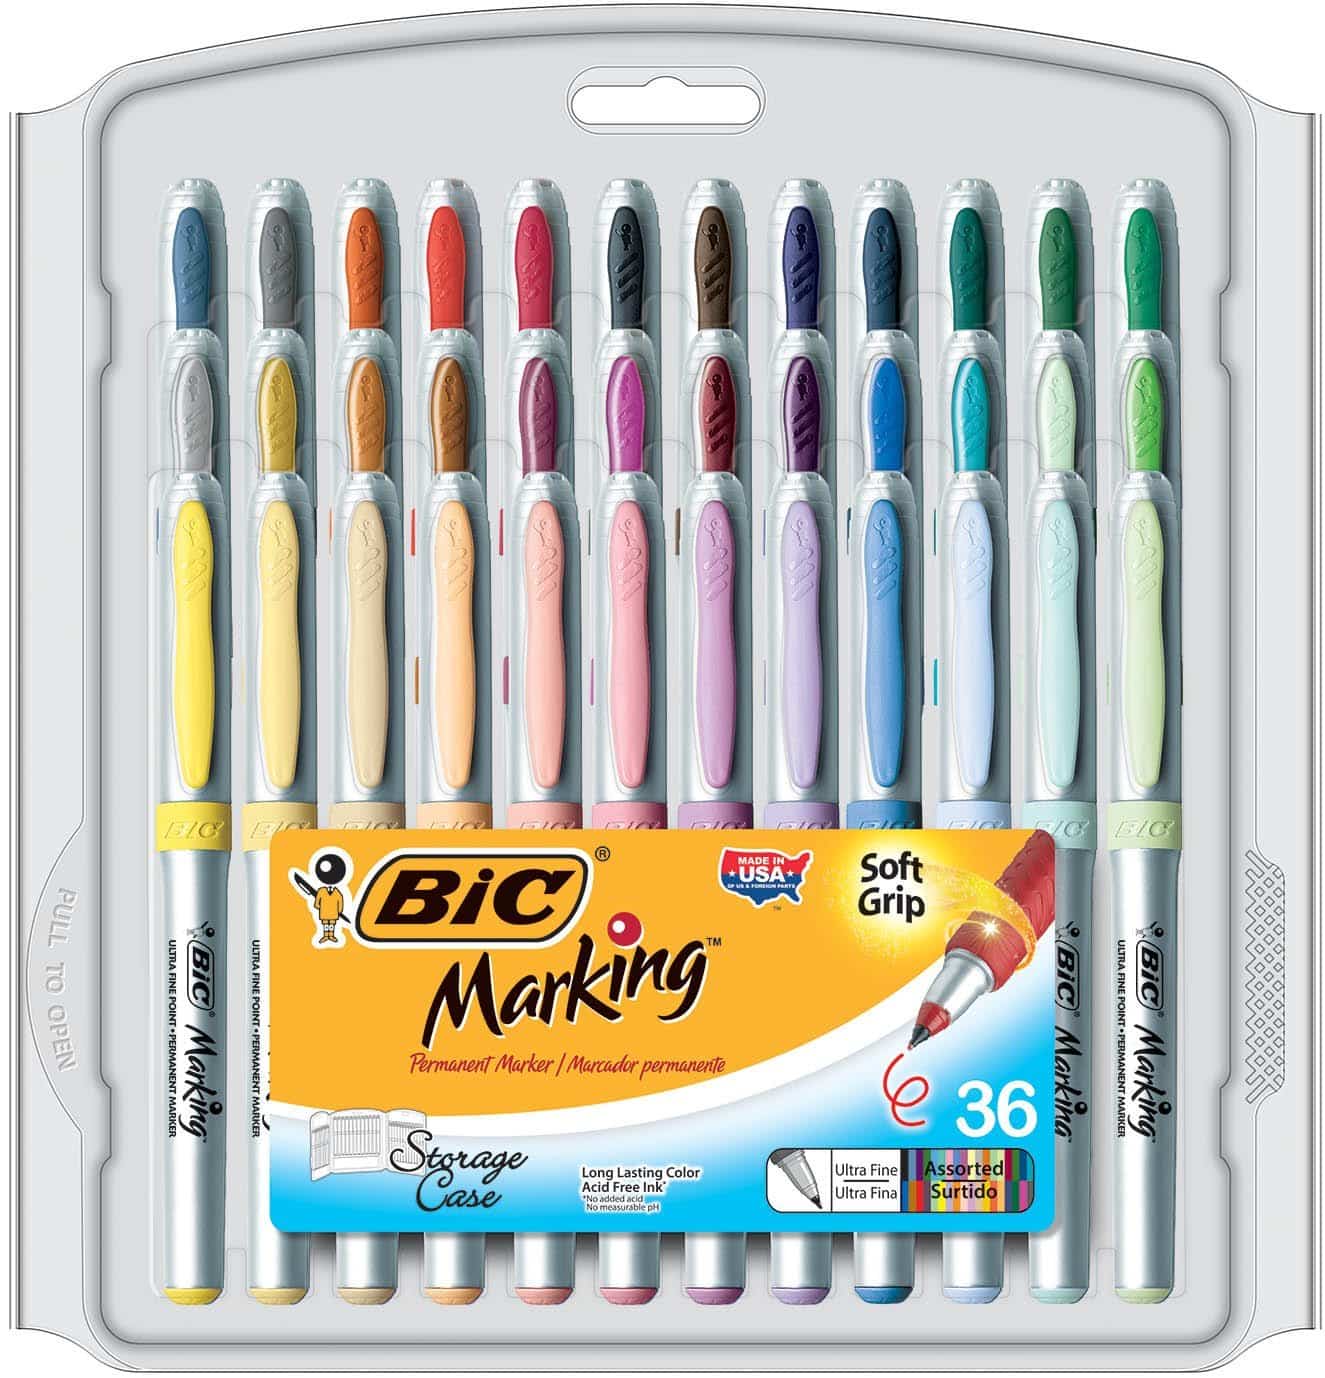 LIGHTNING DEAL ALERT! BIC Marking Permanent Marker Fashion Colors, Ultra Fine Point, Assorted Colors, 36-Count – 51% off!